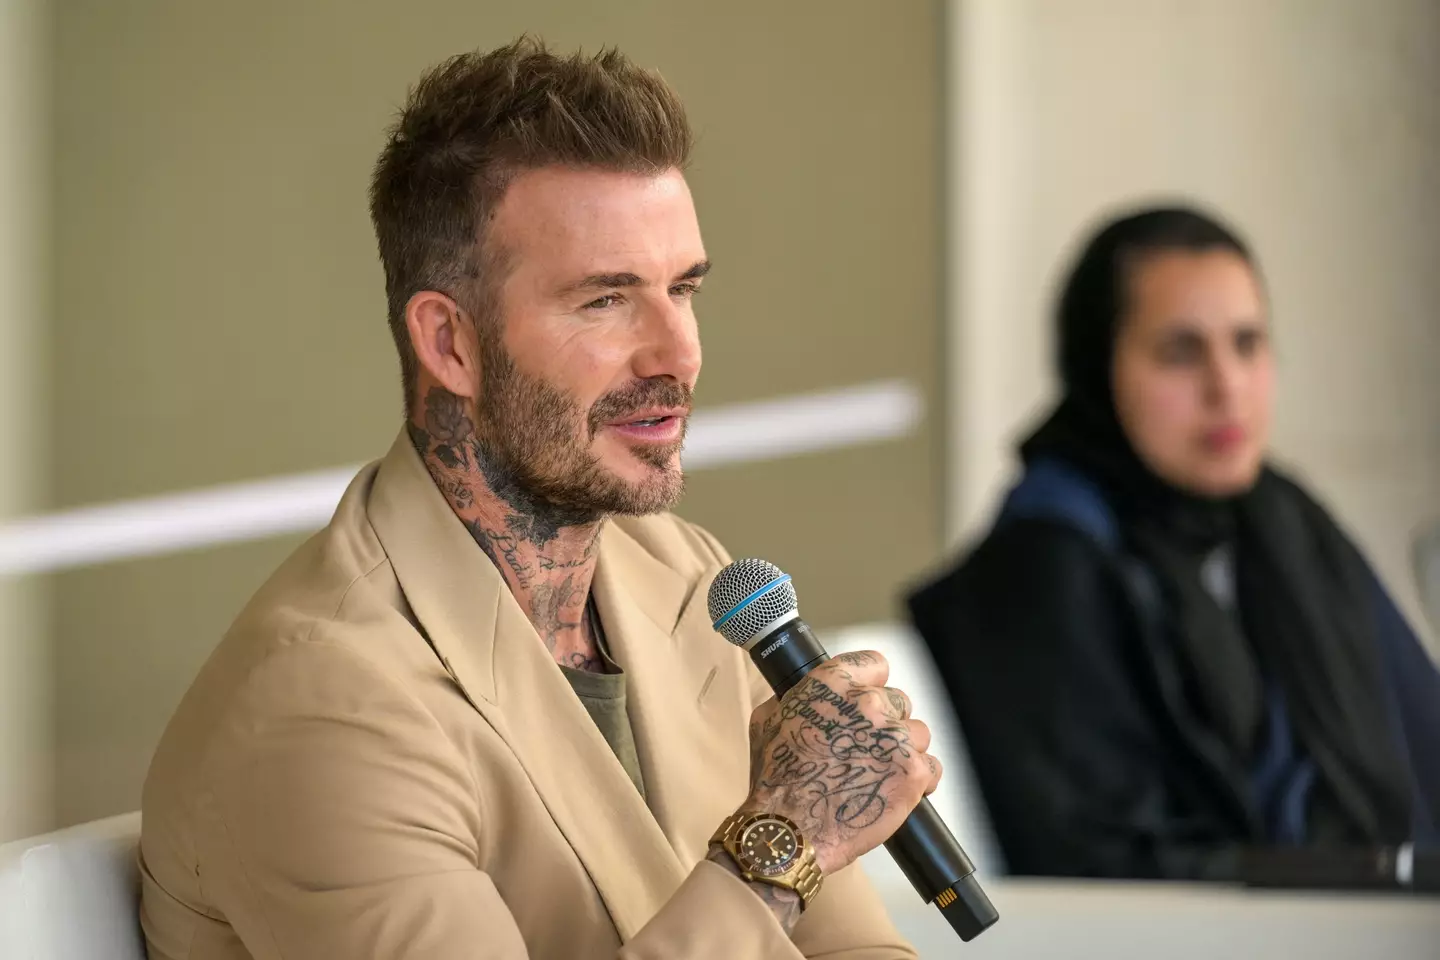 The comedian, 34, recently criticised David Beckham over his relationship with Qatar.